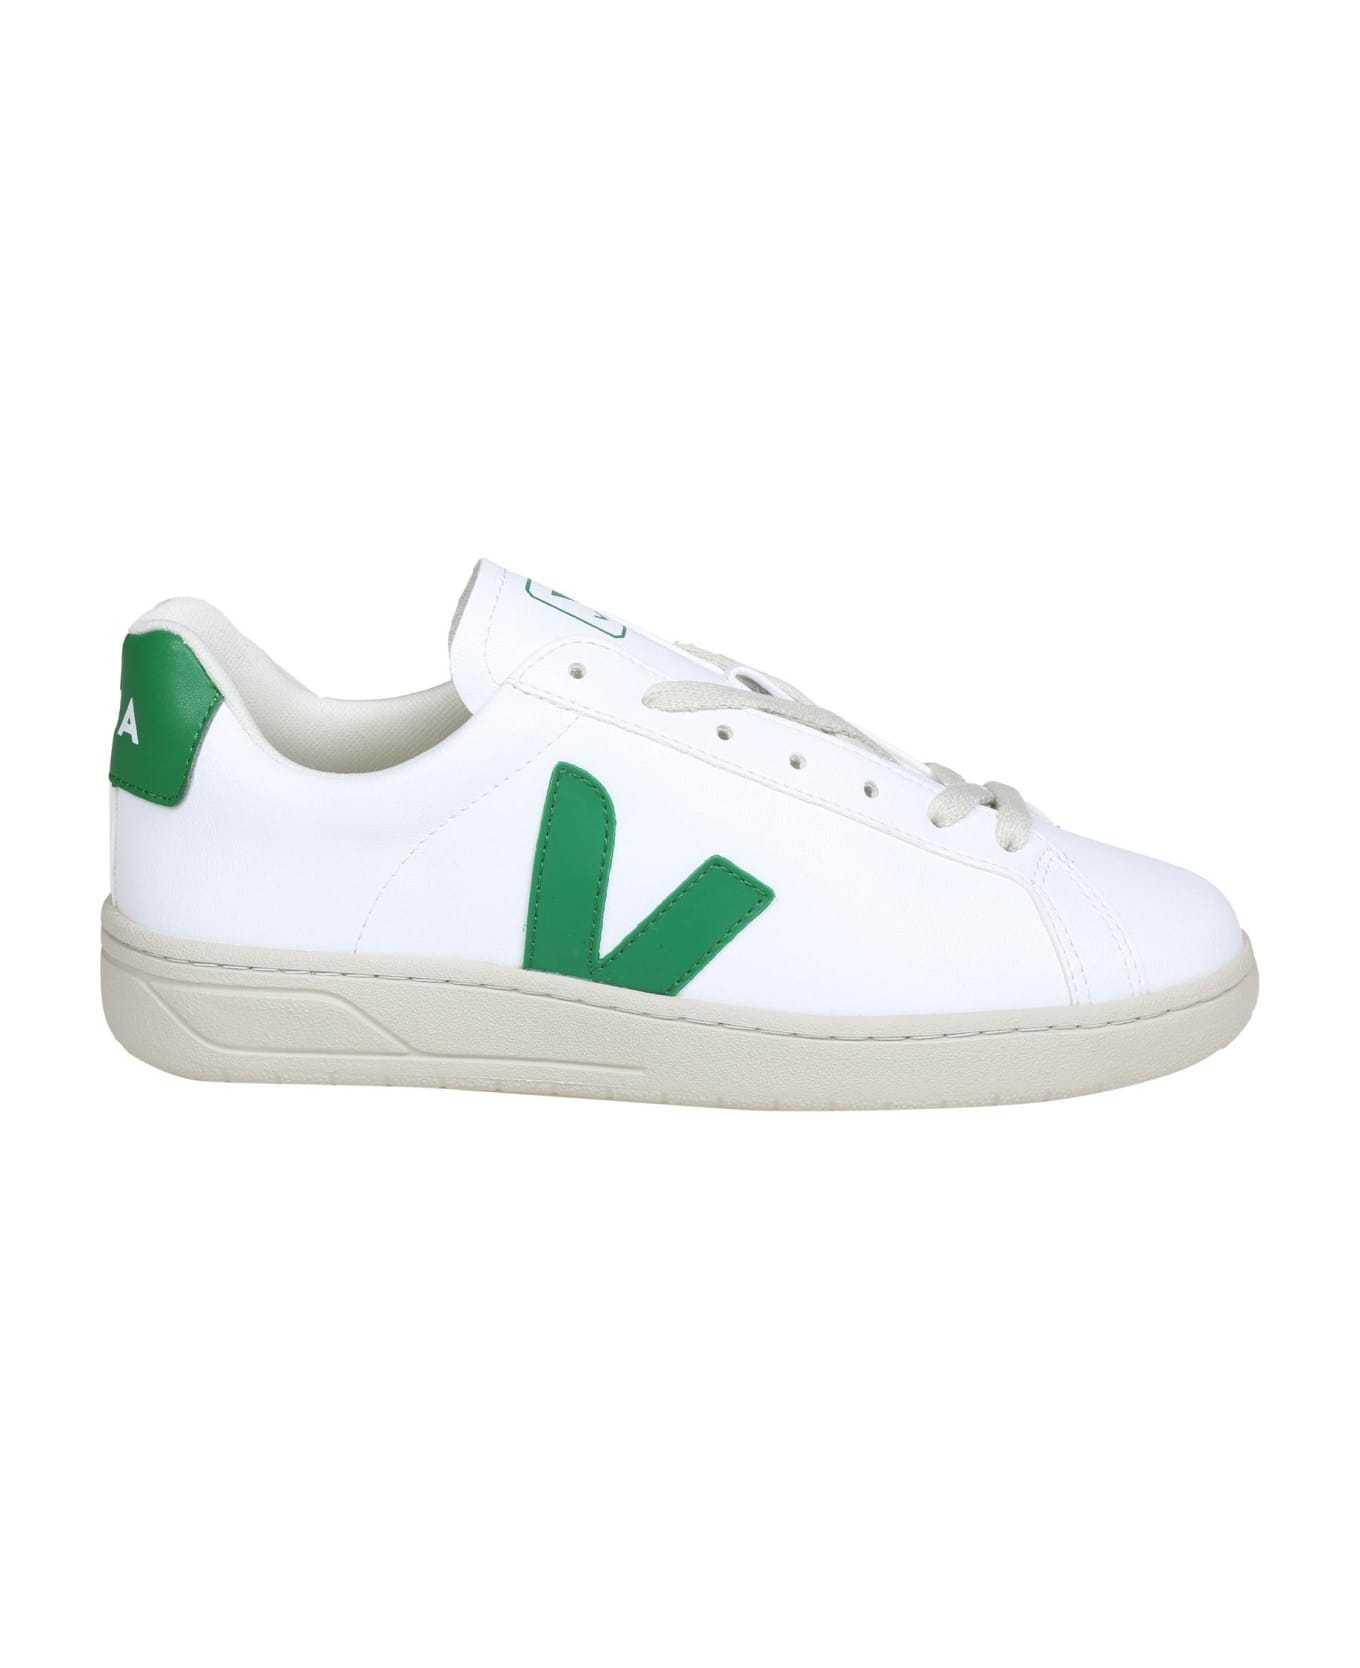 Veja Urca Sneakers In White And Green Leather